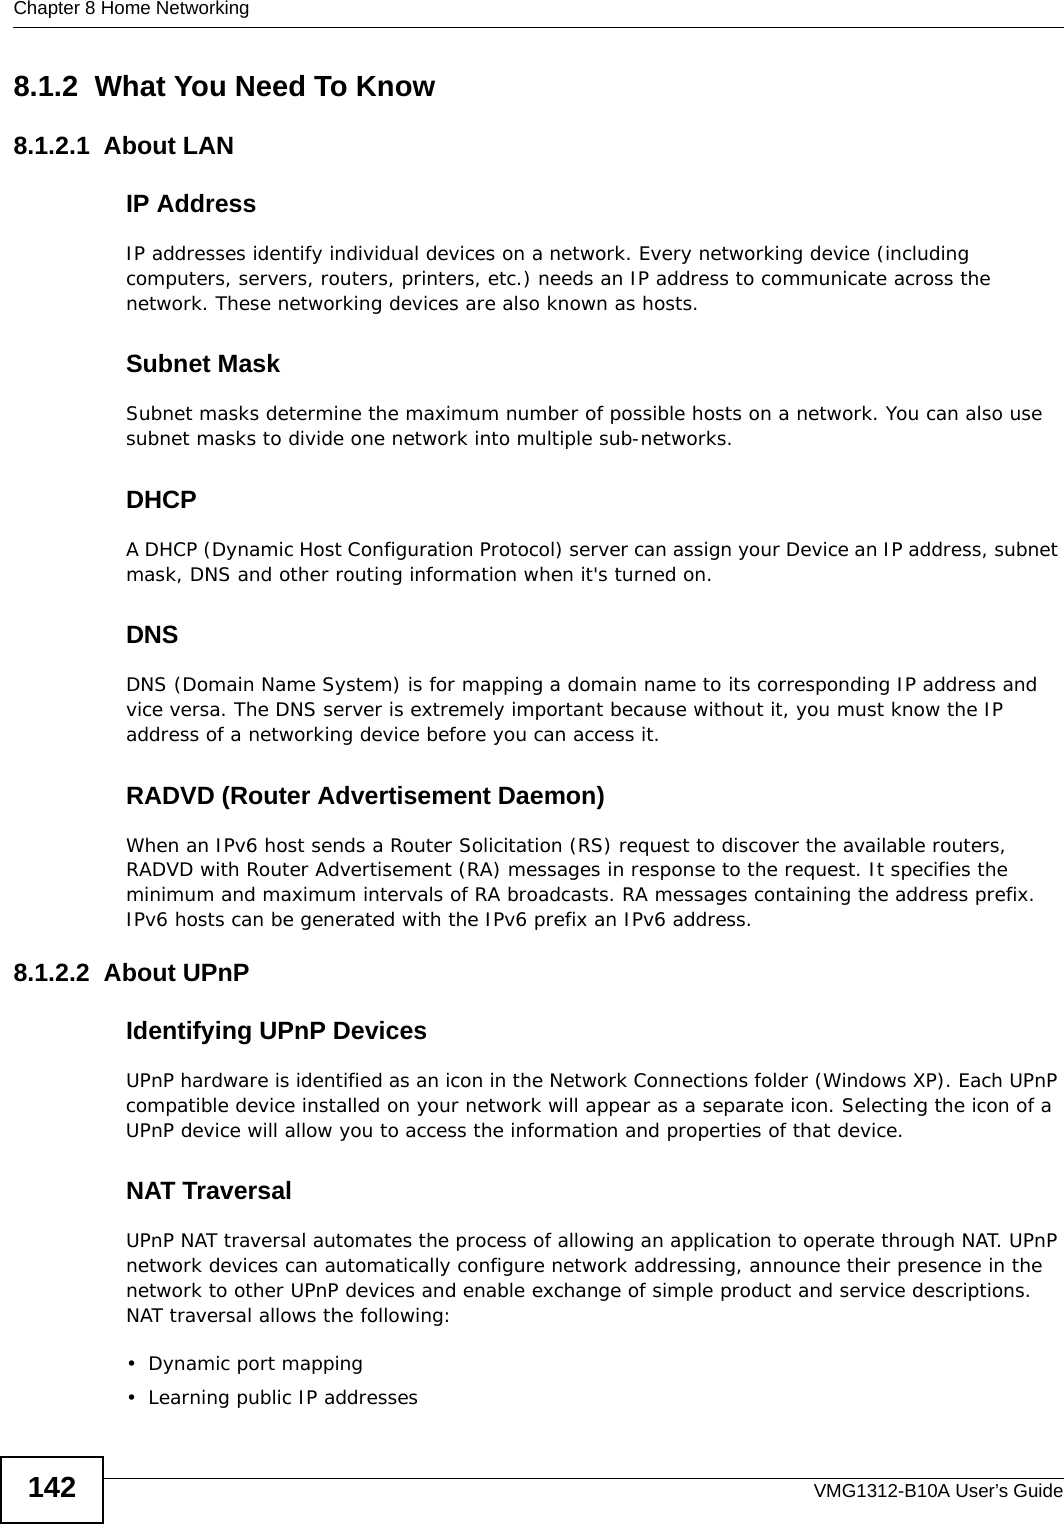 Chapter 8 Home NetworkingVMG1312-B10A User’s Guide1428.1.2  What You Need To Know8.1.2.1  About LANIP AddressIP addresses identify individual devices on a network. Every networking device (including computers, servers, routers, printers, etc.) needs an IP address to communicate across the network. These networking devices are also known as hosts.Subnet MaskSubnet masks determine the maximum number of possible hosts on a network. You can also use subnet masks to divide one network into multiple sub-networks.DHCPA DHCP (Dynamic Host Configuration Protocol) server can assign your Device an IP address, subnet mask, DNS and other routing information when it&apos;s turned on.DNSDNS (Domain Name System) is for mapping a domain name to its corresponding IP address and vice versa. The DNS server is extremely important because without it, you must know the IP address of a networking device before you can access it.RADVD (Router Advertisement Daemon)When an IPv6 host sends a Router Solicitation (RS) request to discover the available routers, RADVD with Router Advertisement (RA) messages in response to the request. It specifies the minimum and maximum intervals of RA broadcasts. RA messages containing the address prefix. IPv6 hosts can be generated with the IPv6 prefix an IPv6 address.8.1.2.2  About UPnPIdentifying UPnP DevicesUPnP hardware is identified as an icon in the Network Connections folder (Windows XP). Each UPnP compatible device installed on your network will appear as a separate icon. Selecting the icon of a UPnP device will allow you to access the information and properties of that device. NAT TraversalUPnP NAT traversal automates the process of allowing an application to operate through NAT. UPnP network devices can automatically configure network addressing, announce their presence in the network to other UPnP devices and enable exchange of simple product and service descriptions. NAT traversal allows the following:• Dynamic port mapping• Learning public IP addresses